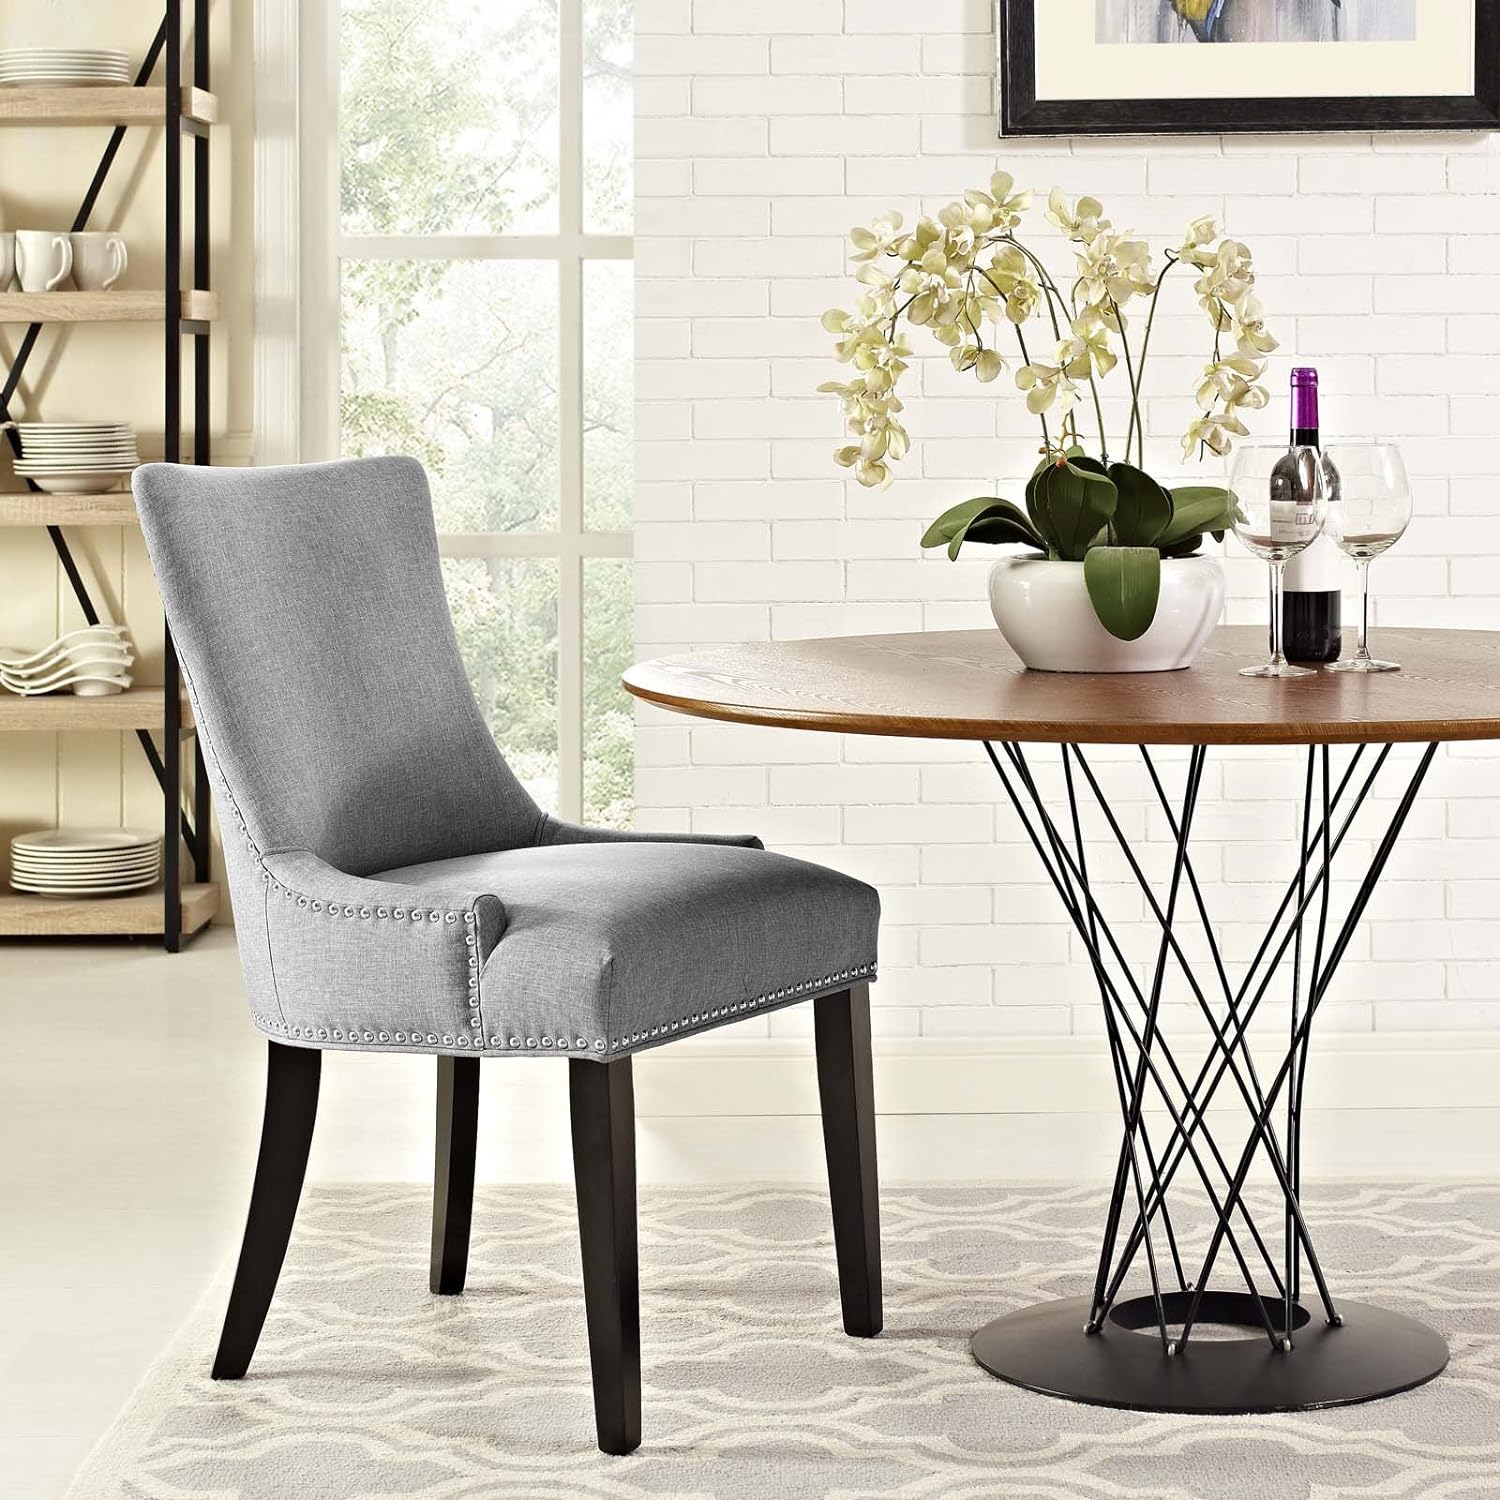 Modway Marquis Modern Gray Upholstered Fabric Dining Chair with Nailhead Trim